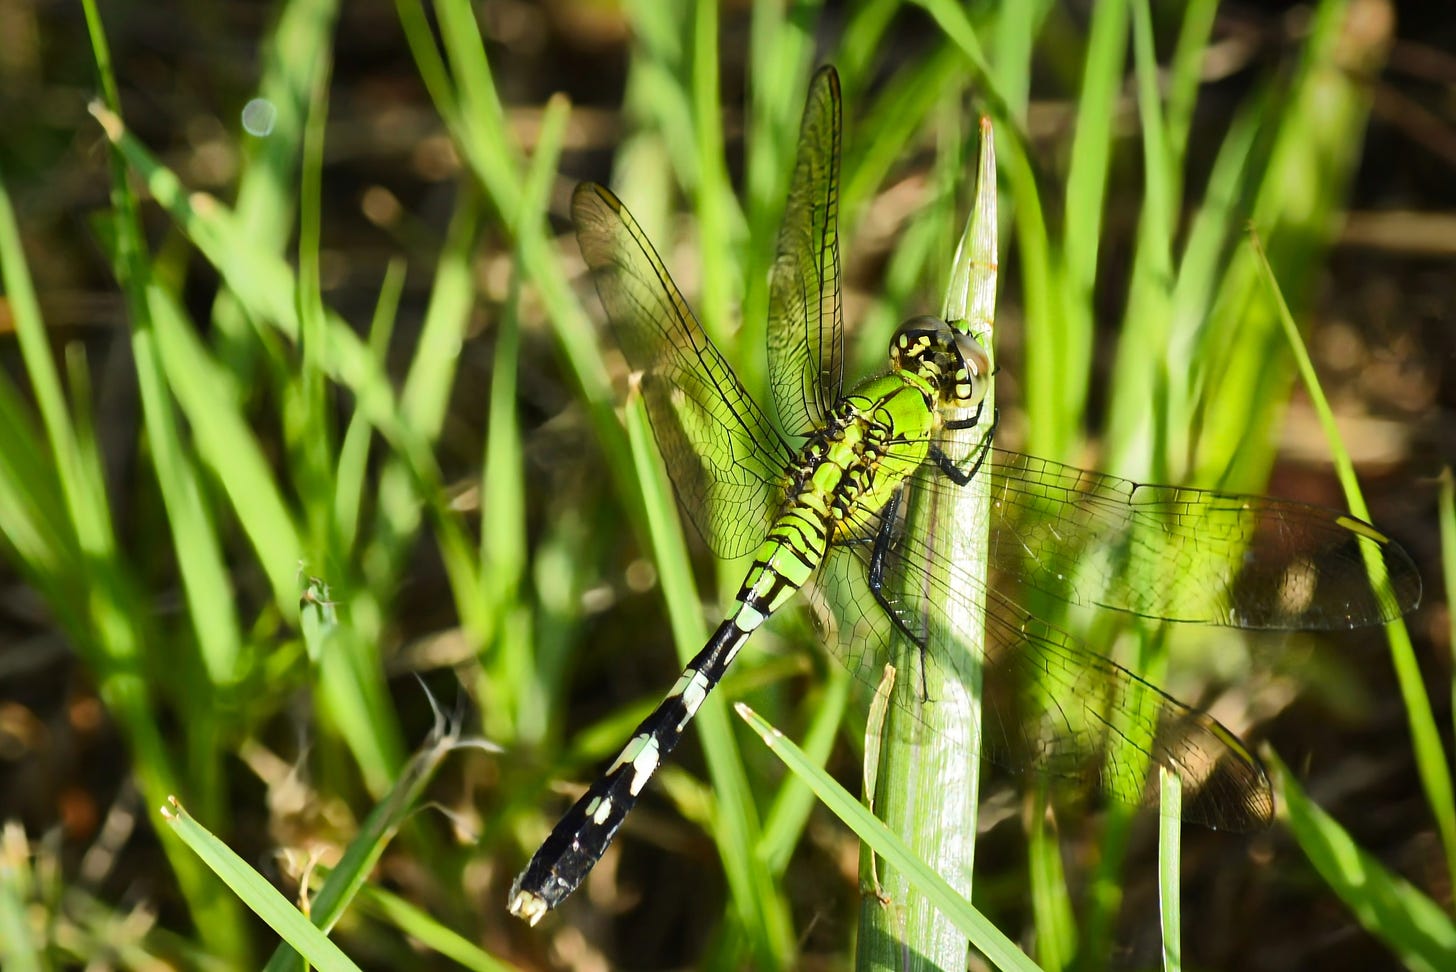 A green dragonfly nestled in the green grass